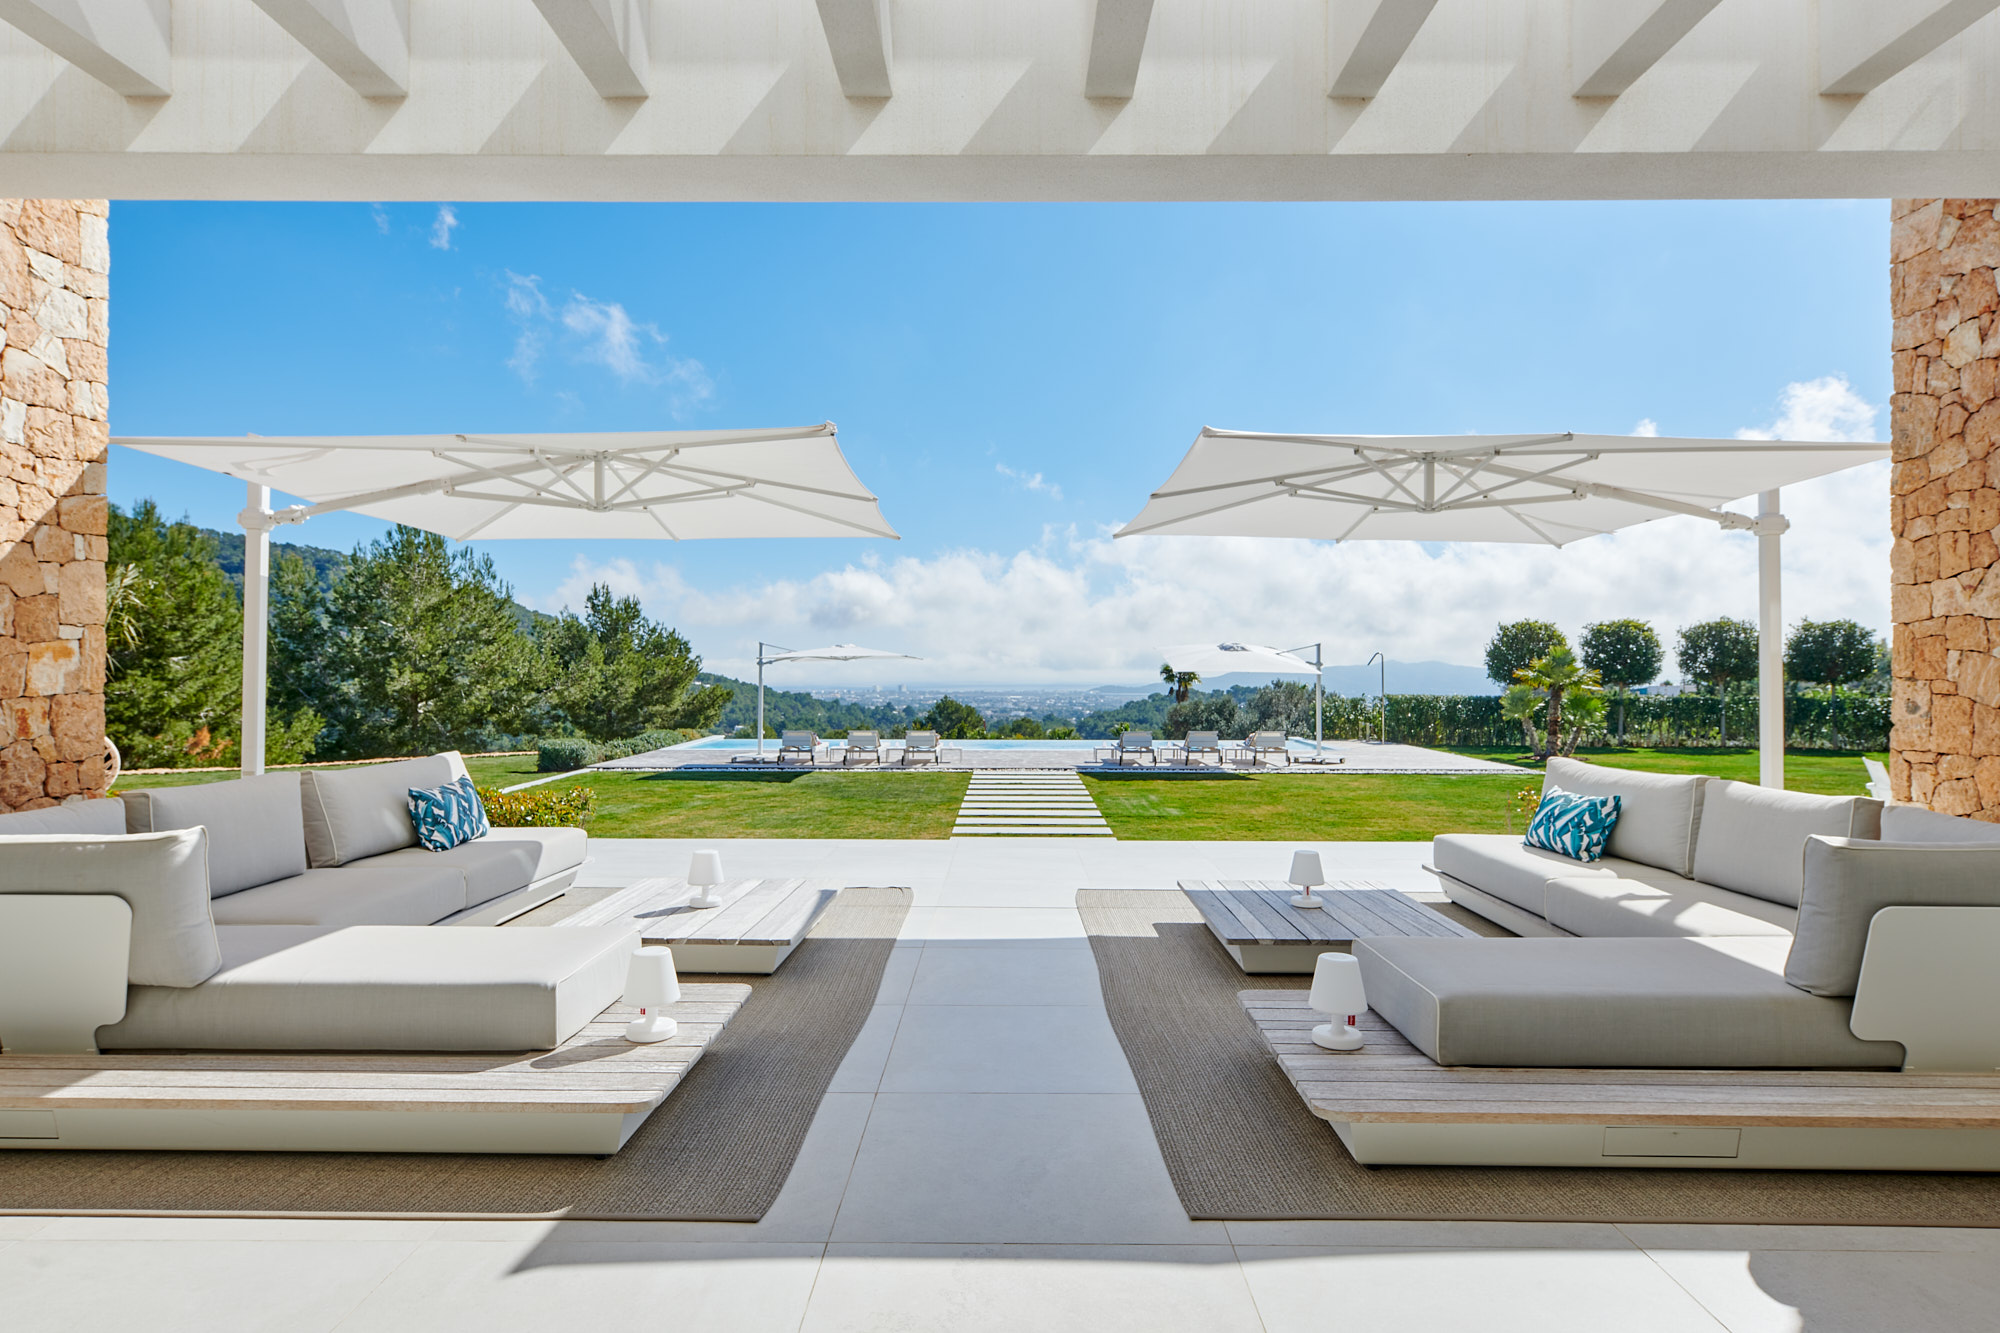 Outdoor furniture frames the view of a pool at a luxury villa to buy in Ibiza